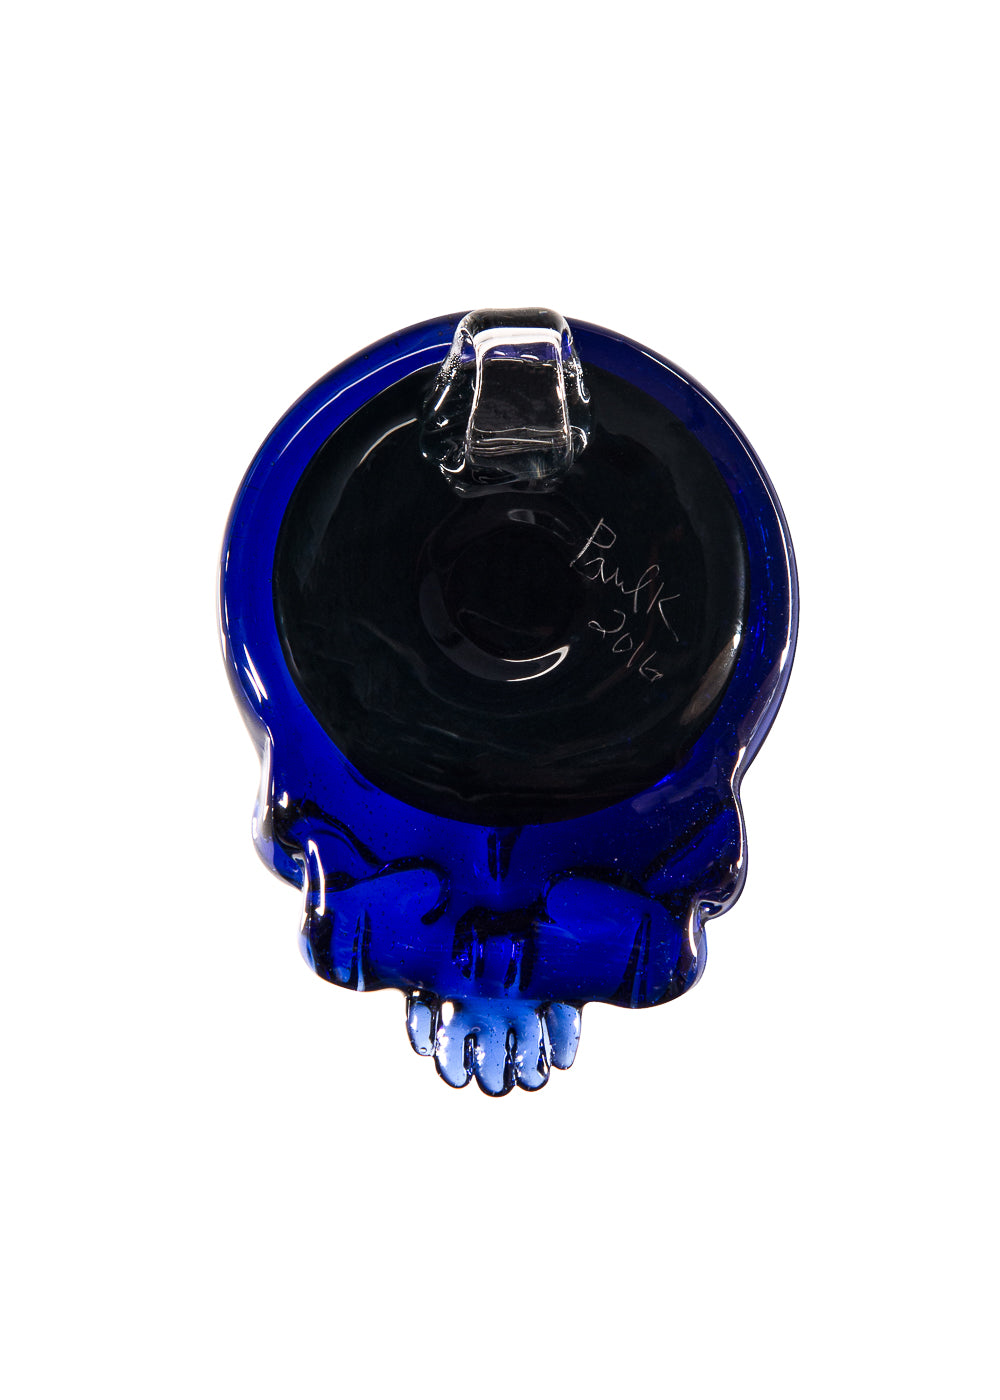 Grateful Dead 50th Anniversary Steal Your Face Air Entrapped Reticello Pendant by Paul Katherman